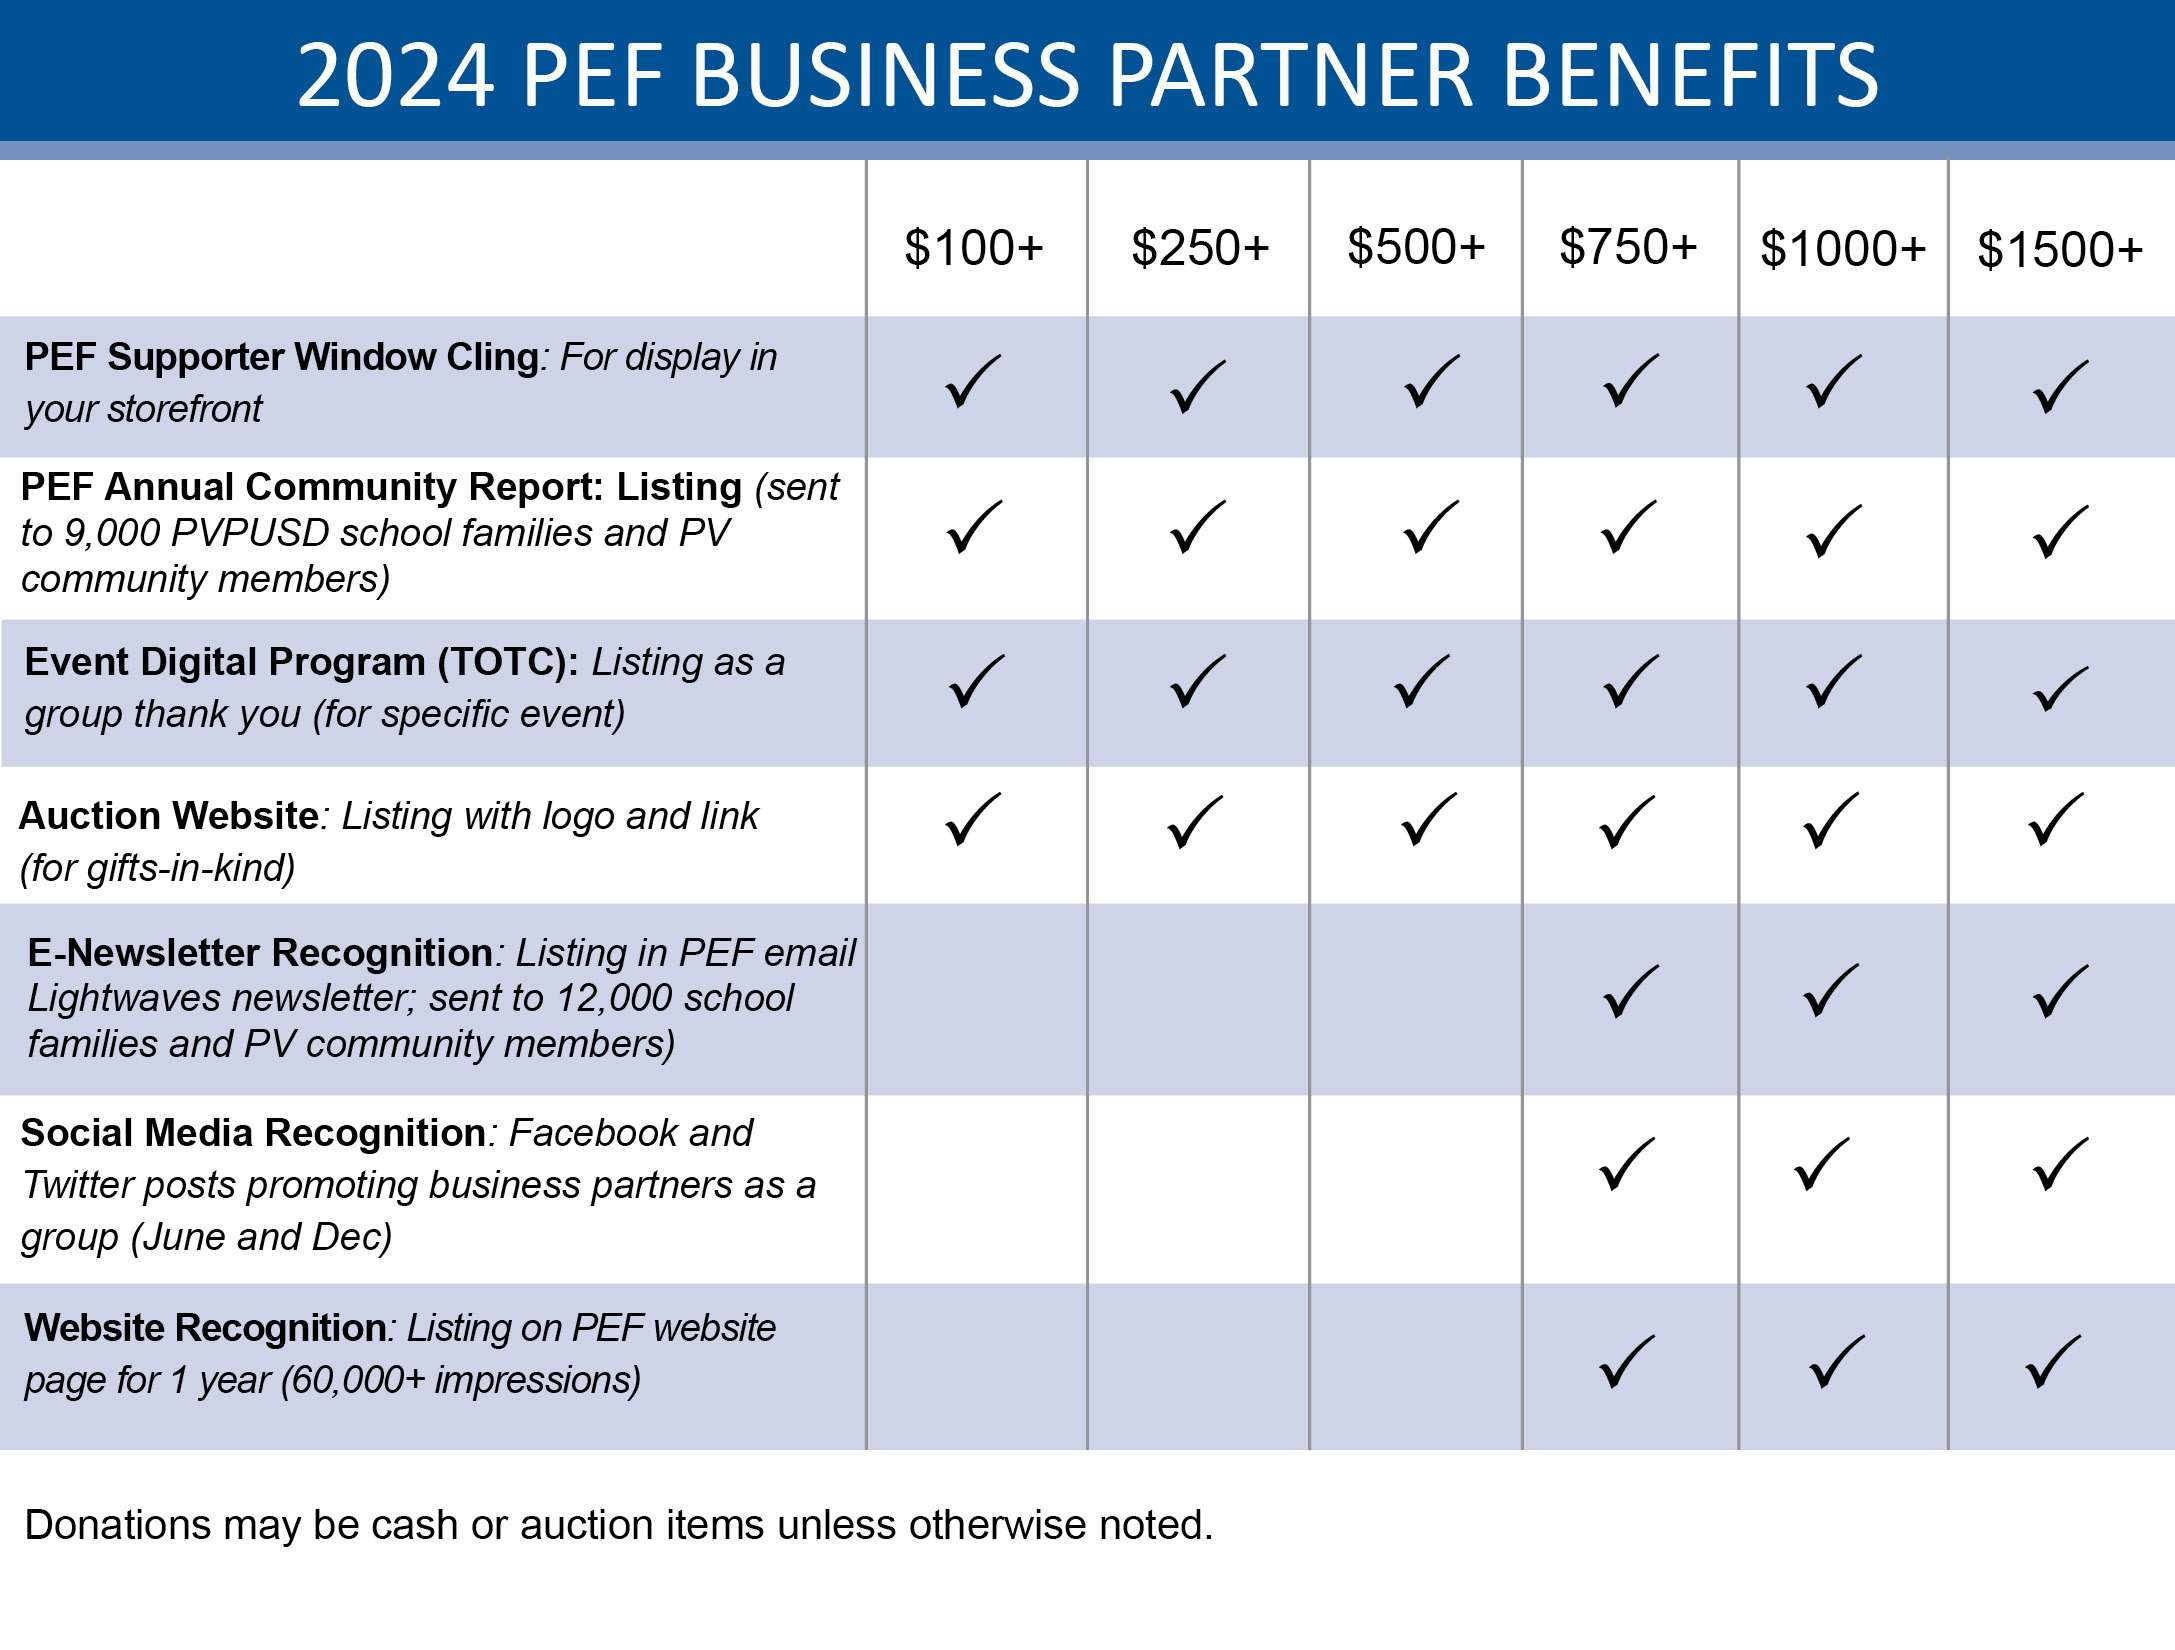 Benefits chart for PEF Business Partners